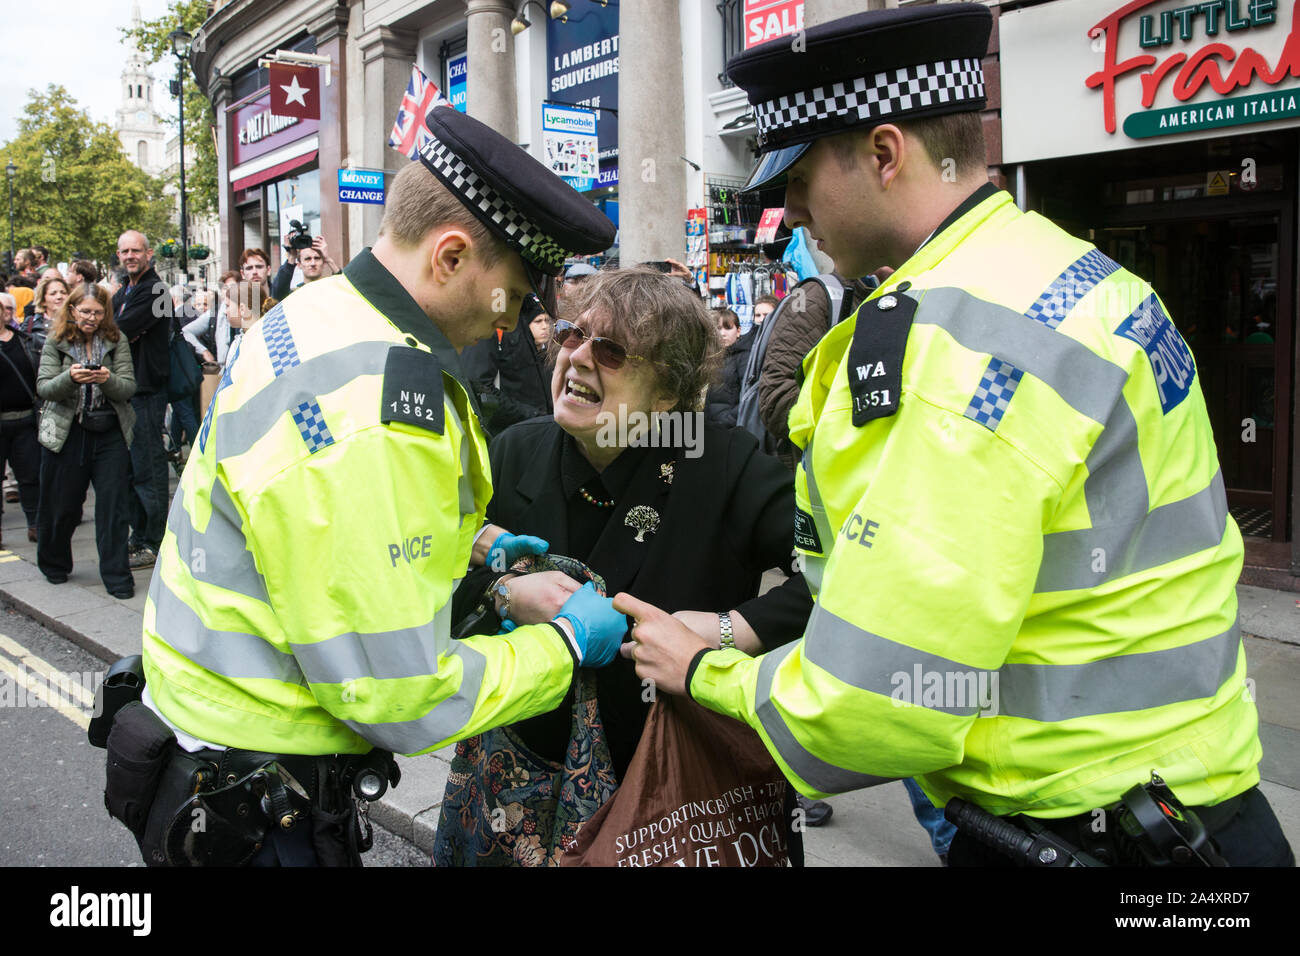 London, UK. 16 October, 2019. Police officers arrest a climate activist from Extinction Rebellion who had defied the Metropolitan Police prohibition on Extinction Rebellion Autumn Uprising protests throughout London under Section 14 of the Public Order Act 1986 by sitting in the road in Whitehall. Credit: Mark Kerrison/Alamy Live News Stock Photo